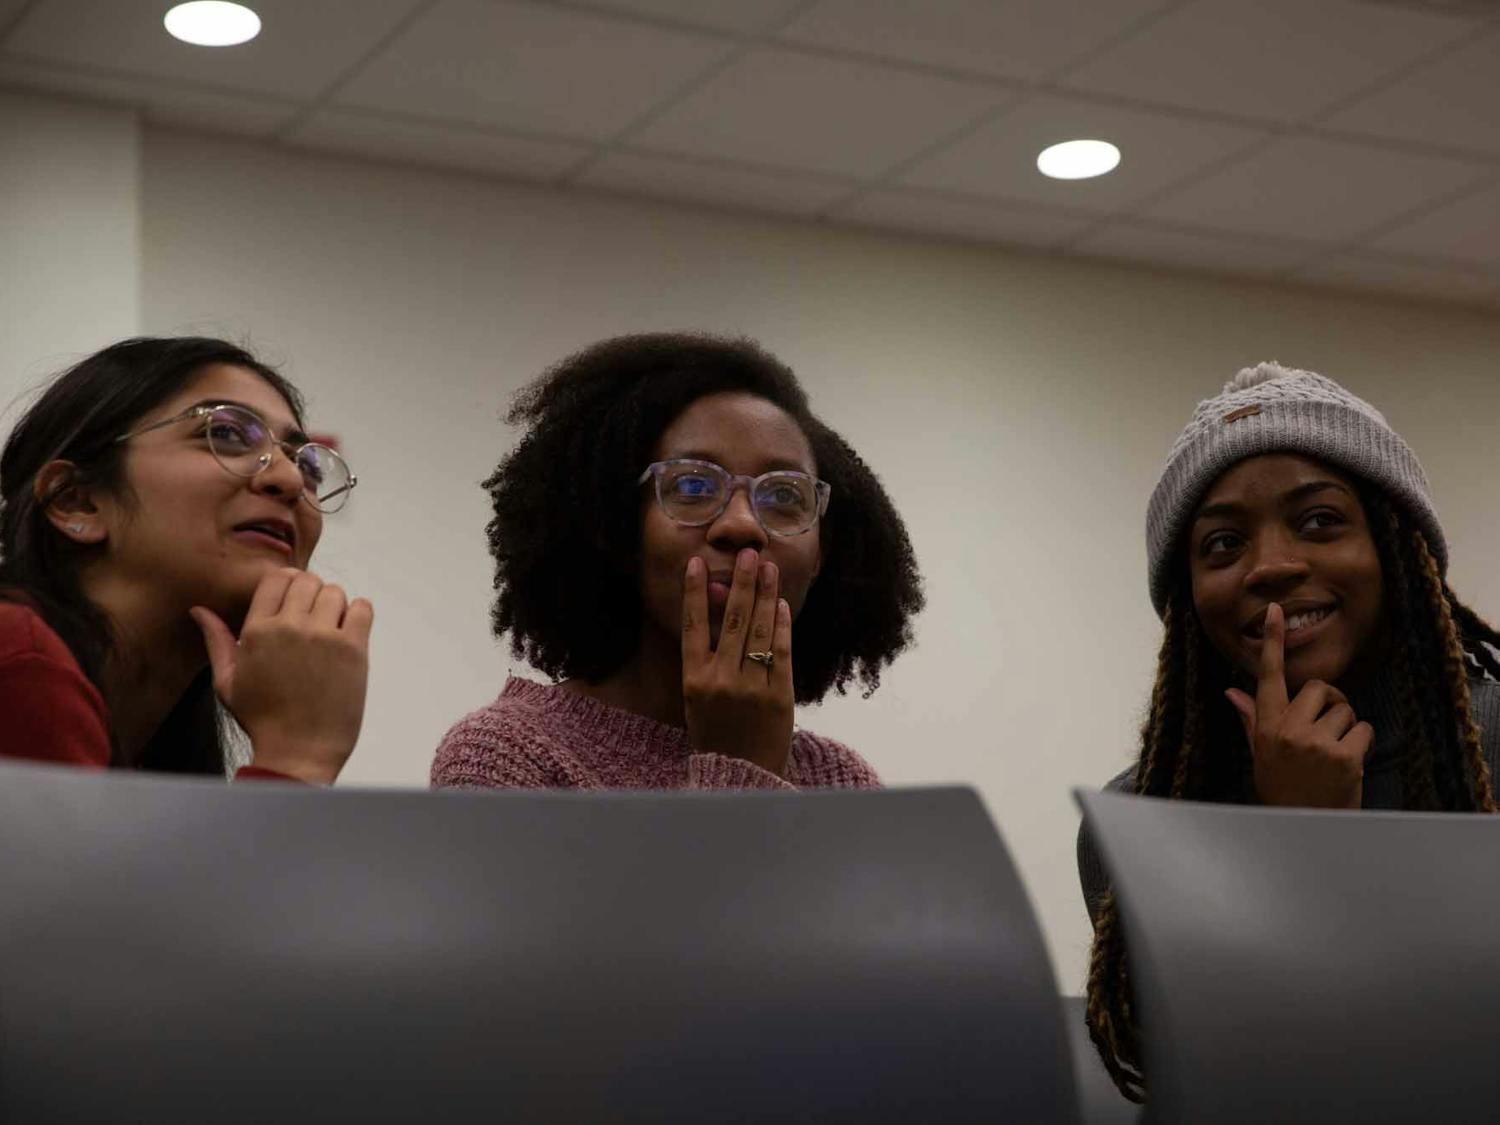 Members of The Bridge play Kahoot! on Thursday, March 5, 2020 during their fourth anniversary. The Bridge serves as a safe pace for many women of color on campus.